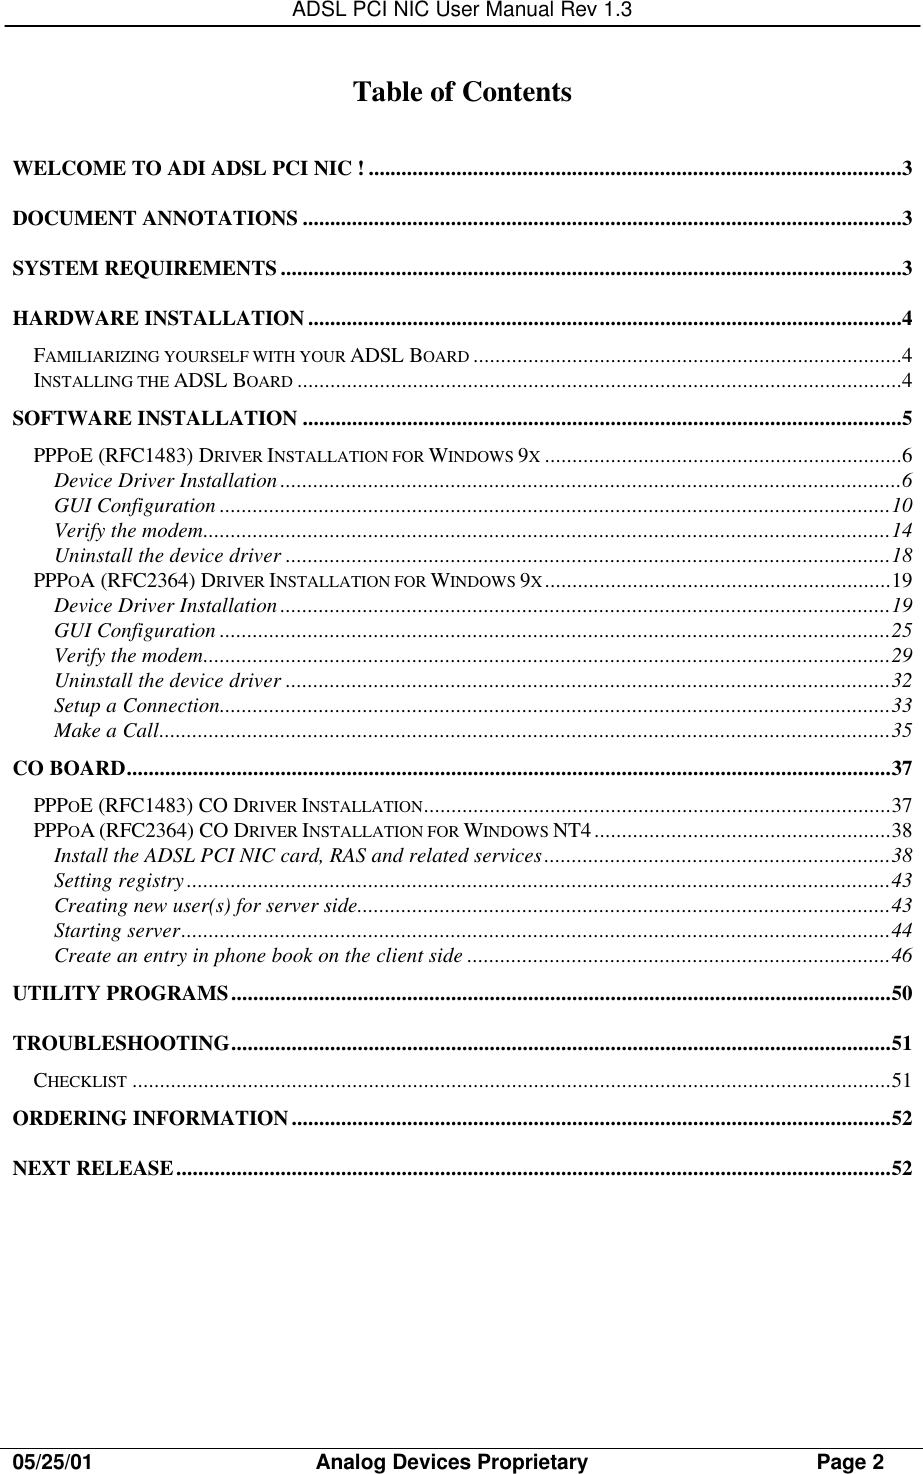 ADSL PCI NIC User Manual Rev 1.305/25/01                                     Analog Devices Proprietary                                      Page 2Table of ContentsWELCOME TO ADI ADSL PCI NIC ! .................................................................................................3DOCUMENT ANNOTATIONS .............................................................................................................3SYSTEM REQUIREMENTS .................................................................................................................3HARDWARE INSTALLATION ............................................................................................................4FAMILIARIZING YOURSELF WITH YOUR ADSL BOARD ..............................................................................4INSTALLING THE ADSL BOARD ..............................................................................................................4SOFTWARE INSTALLATION .............................................................................................................5PPPOE (RFC1483) DRIVER INSTALLATION FOR WINDOWS 9X.................................................................6Device Driver Installation.................................................................................................................6GUI Configuration ..........................................................................................................................10Verify the modem.............................................................................................................................14Uninstall the device driver ..............................................................................................................18PPPOA (RFC2364) DRIVER INSTALLATION FOR WINDOWS 9X...............................................................19Device Driver Installation...............................................................................................................19GUI Configuration ..........................................................................................................................25Verify the modem.............................................................................................................................29Uninstall the device driver ..............................................................................................................32Setup a Connection..........................................................................................................................33Make a Call.....................................................................................................................................35CO BOARD...........................................................................................................................................37PPPOE (RFC1483) CO DRIVER INSTALLATION.....................................................................................37PPPOA (RFC2364) CO DRIVER INSTALLATION FOR WINDOWS NT4......................................................38Install the ADSL PCI NIC card, RAS and related services...............................................................38Setting registry................................................................................................................................43Creating new user(s) for server side.................................................................................................43Starting server.................................................................................................................................44Create an entry in phone book on the client side .............................................................................46UTILITY PROGRAMS........................................................................................................................50TROUBLESHOOTING........................................................................................................................51CHECKLIST ..........................................................................................................................................51ORDERING INFORMATION.............................................................................................................52NEXT RELEASE..................................................................................................................................52